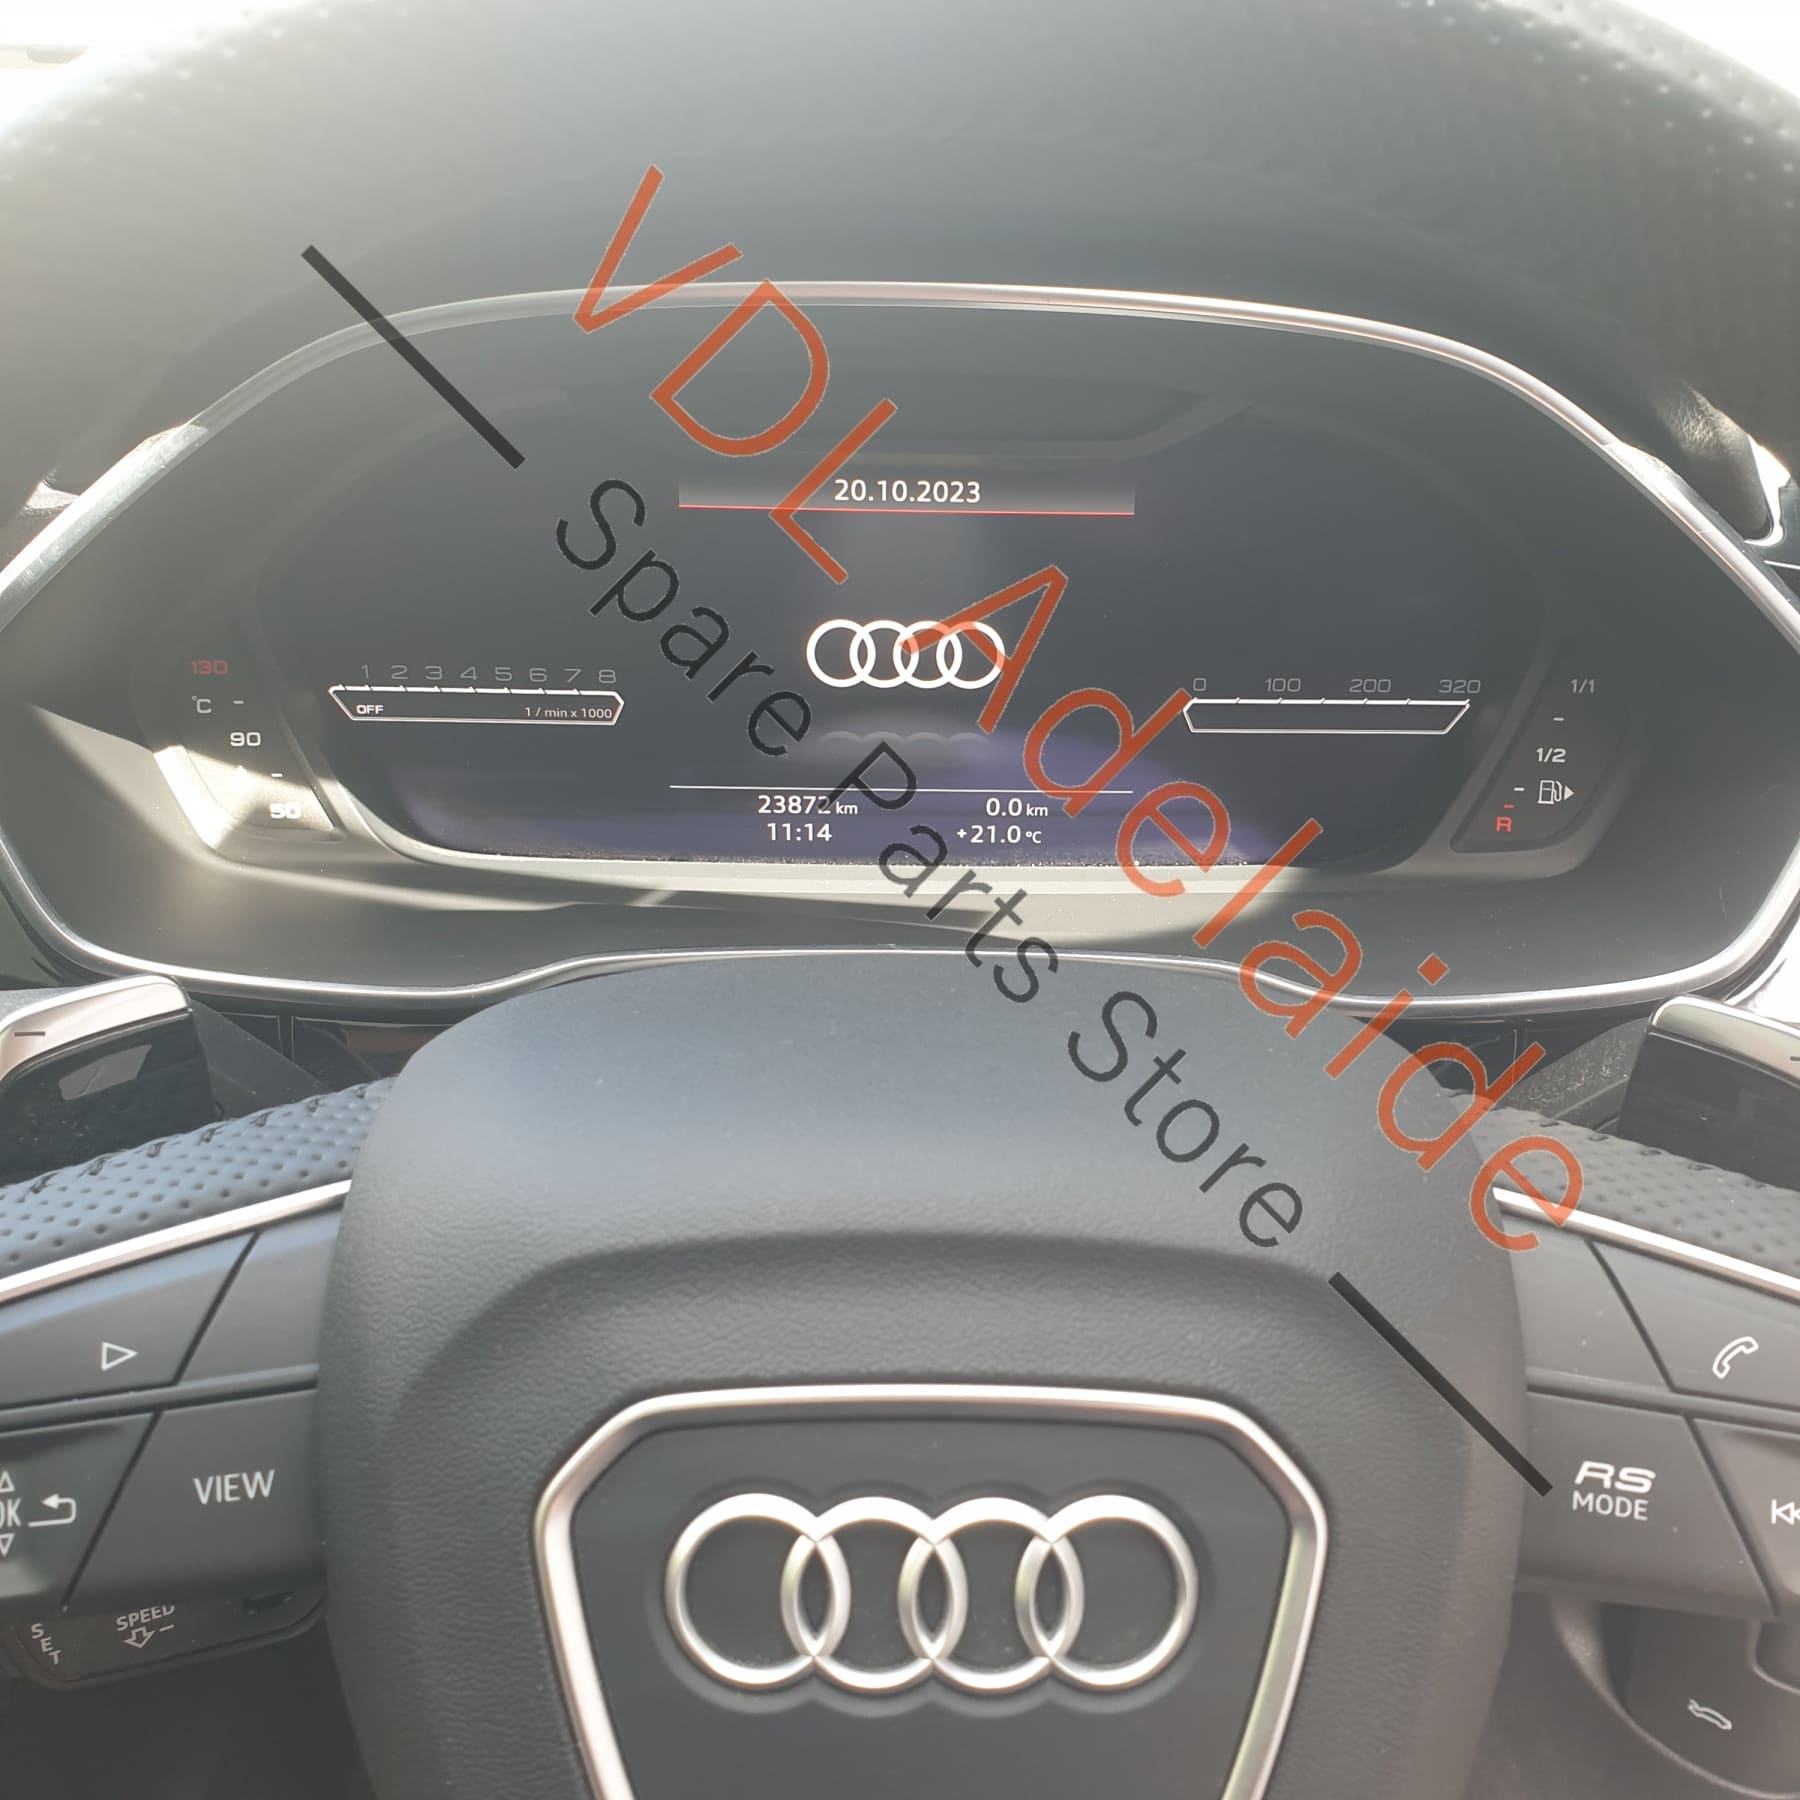 83A035423AVY1    Audi Q3 RSQ3 F3 Door Speaker Trim Cover Left Side 83A035423A VY1 Slate Grey